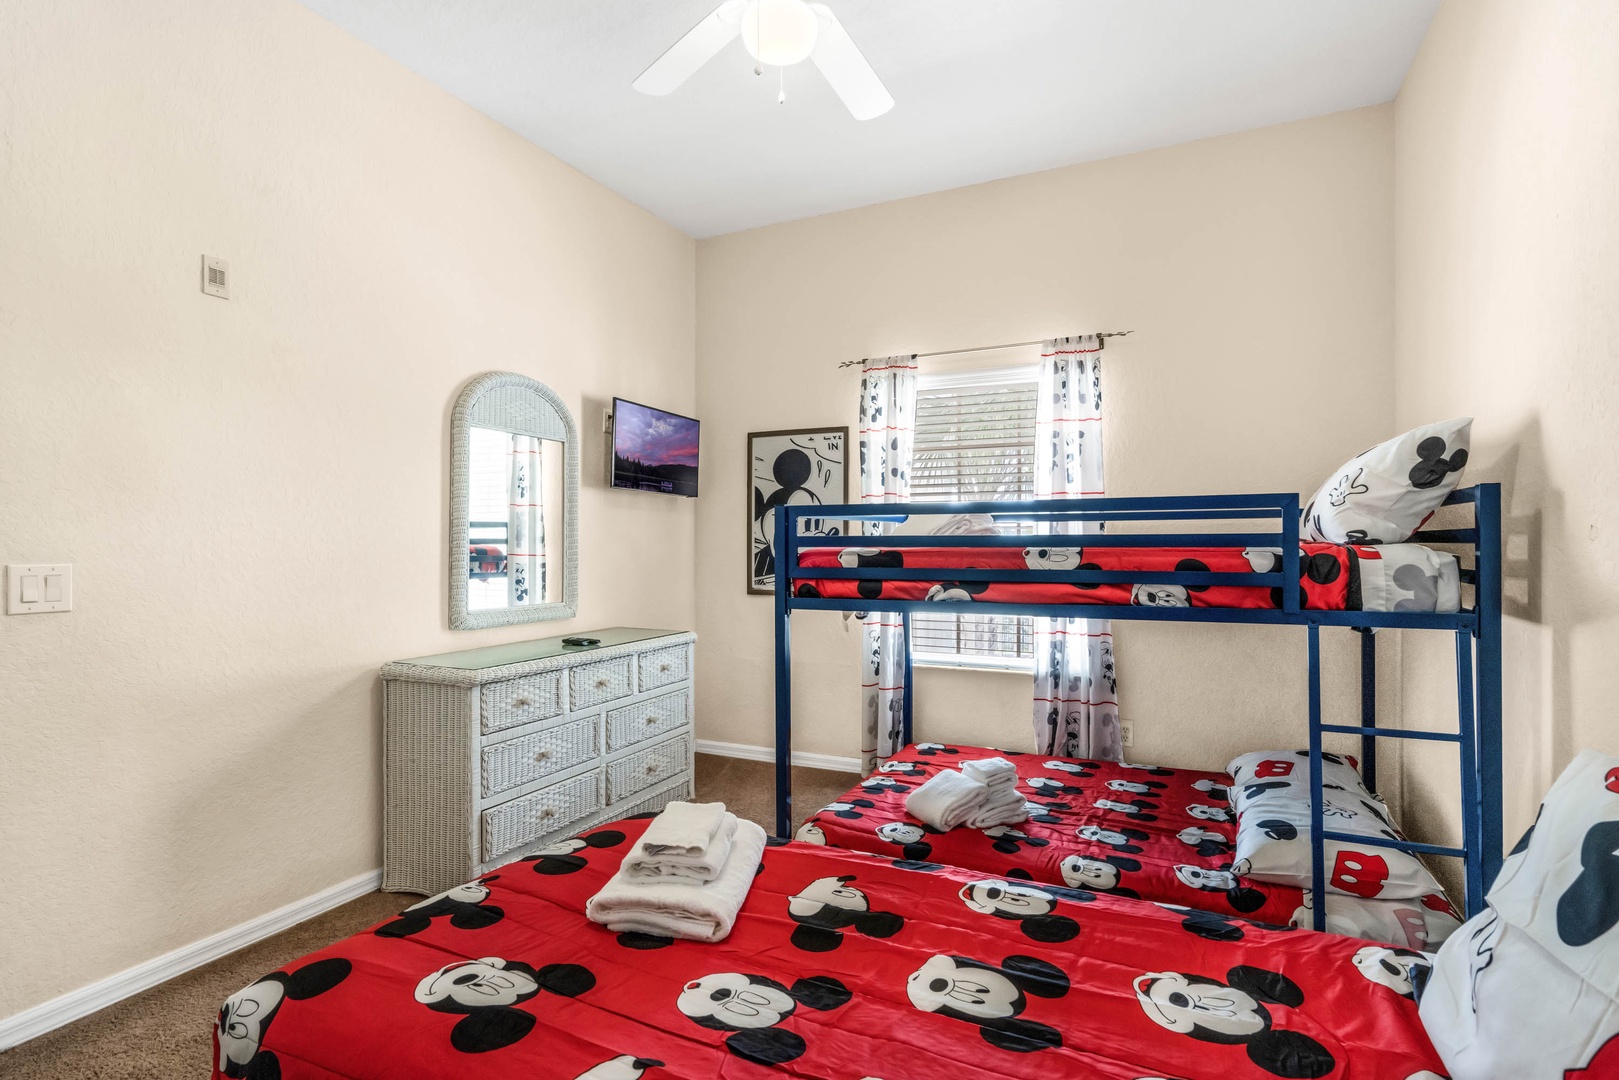 The bunk room feels like its own clubhouse, offering a full-over-full bunk and twin bed with TV